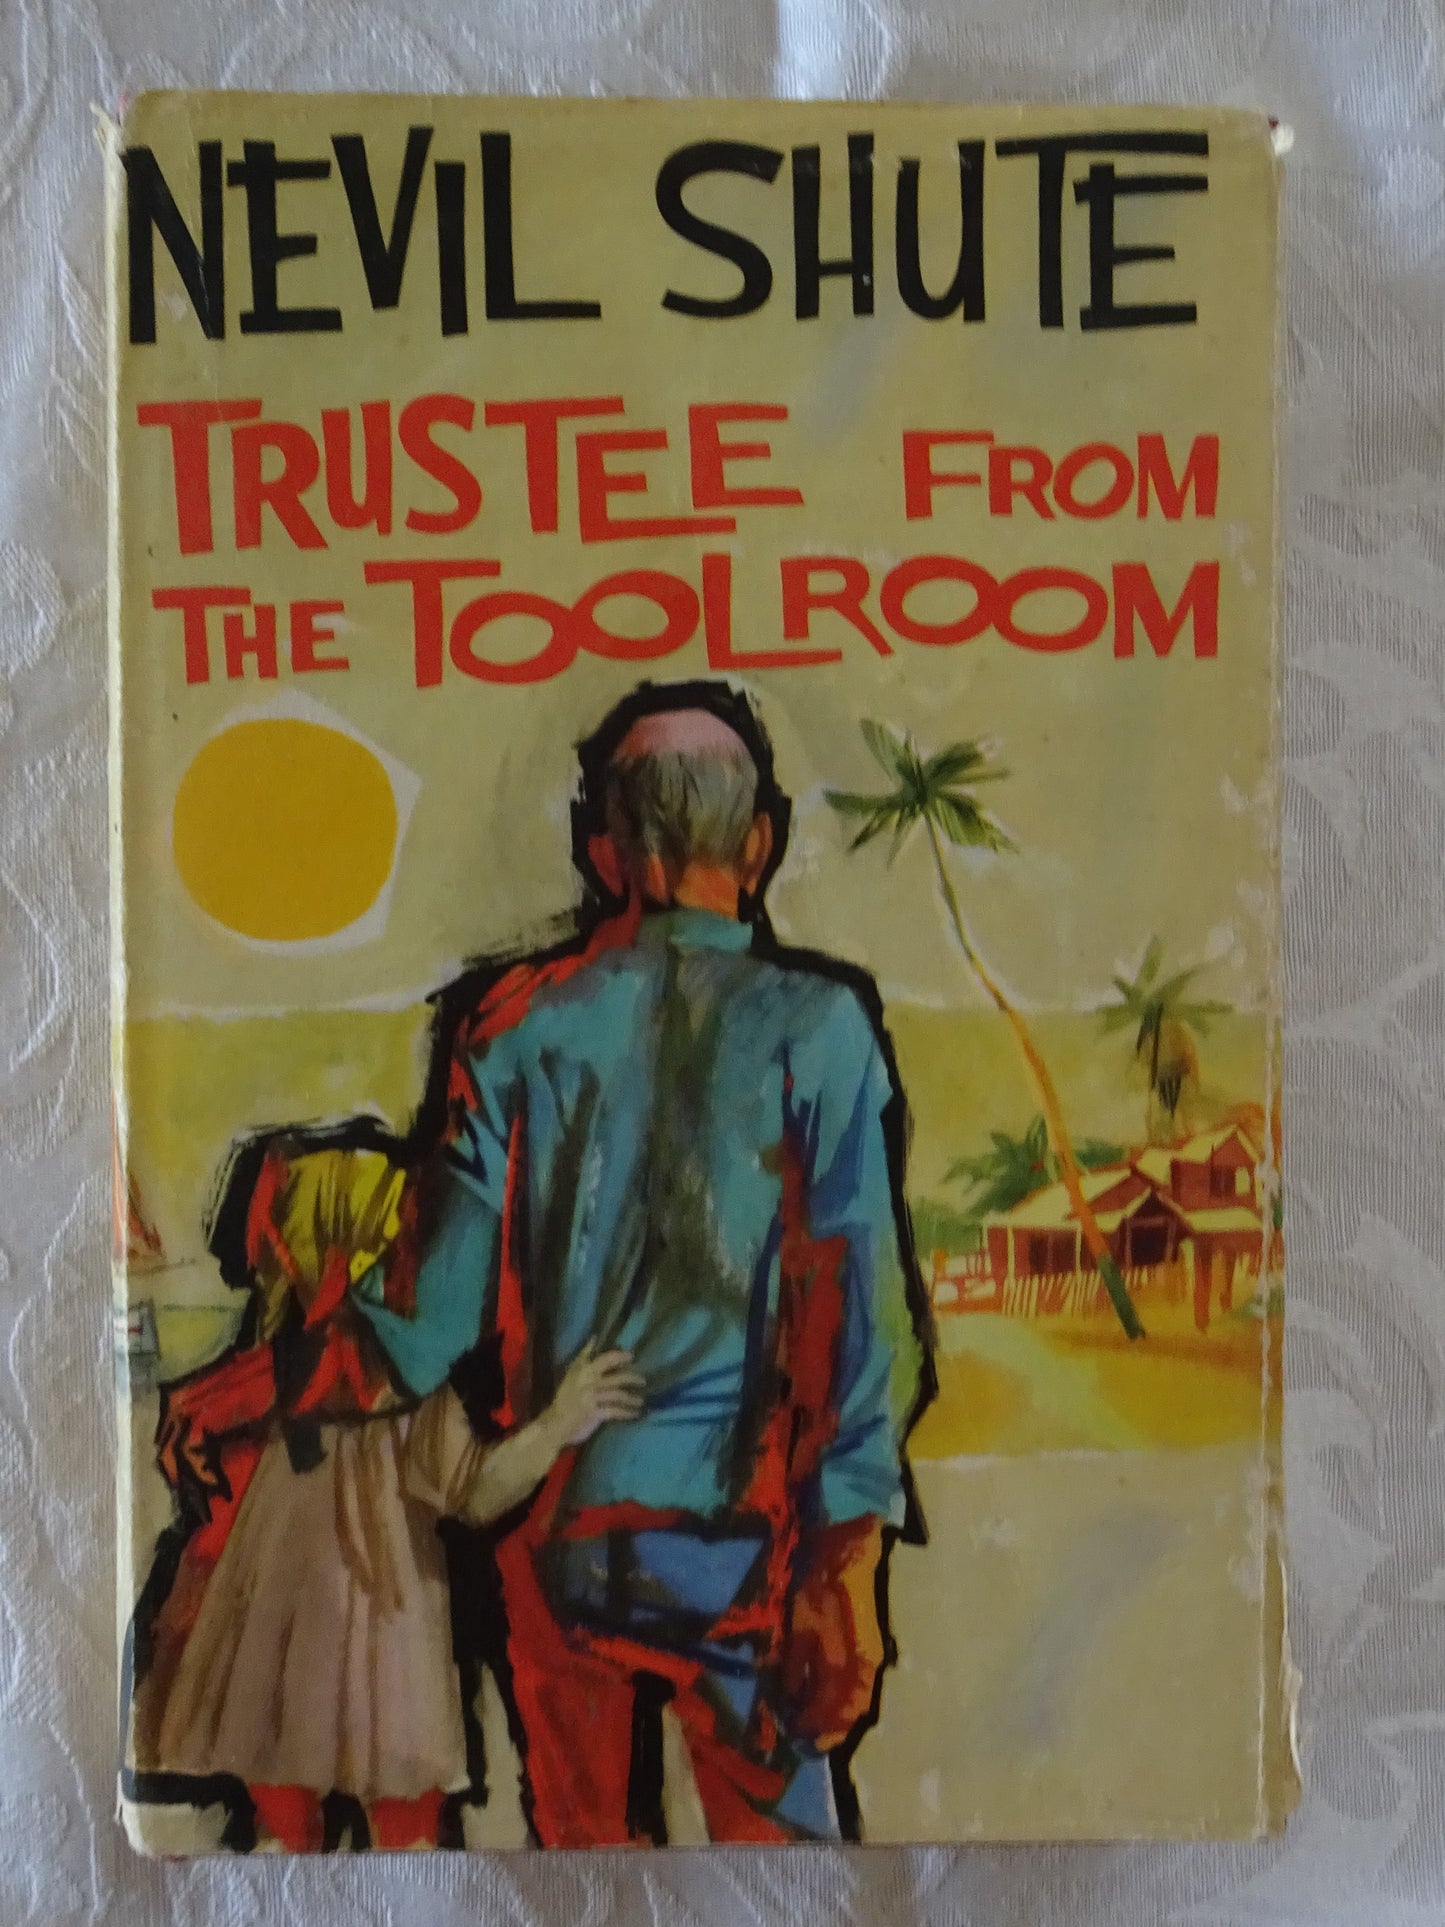 Trustee From The Toolroom  by Nevil Shute